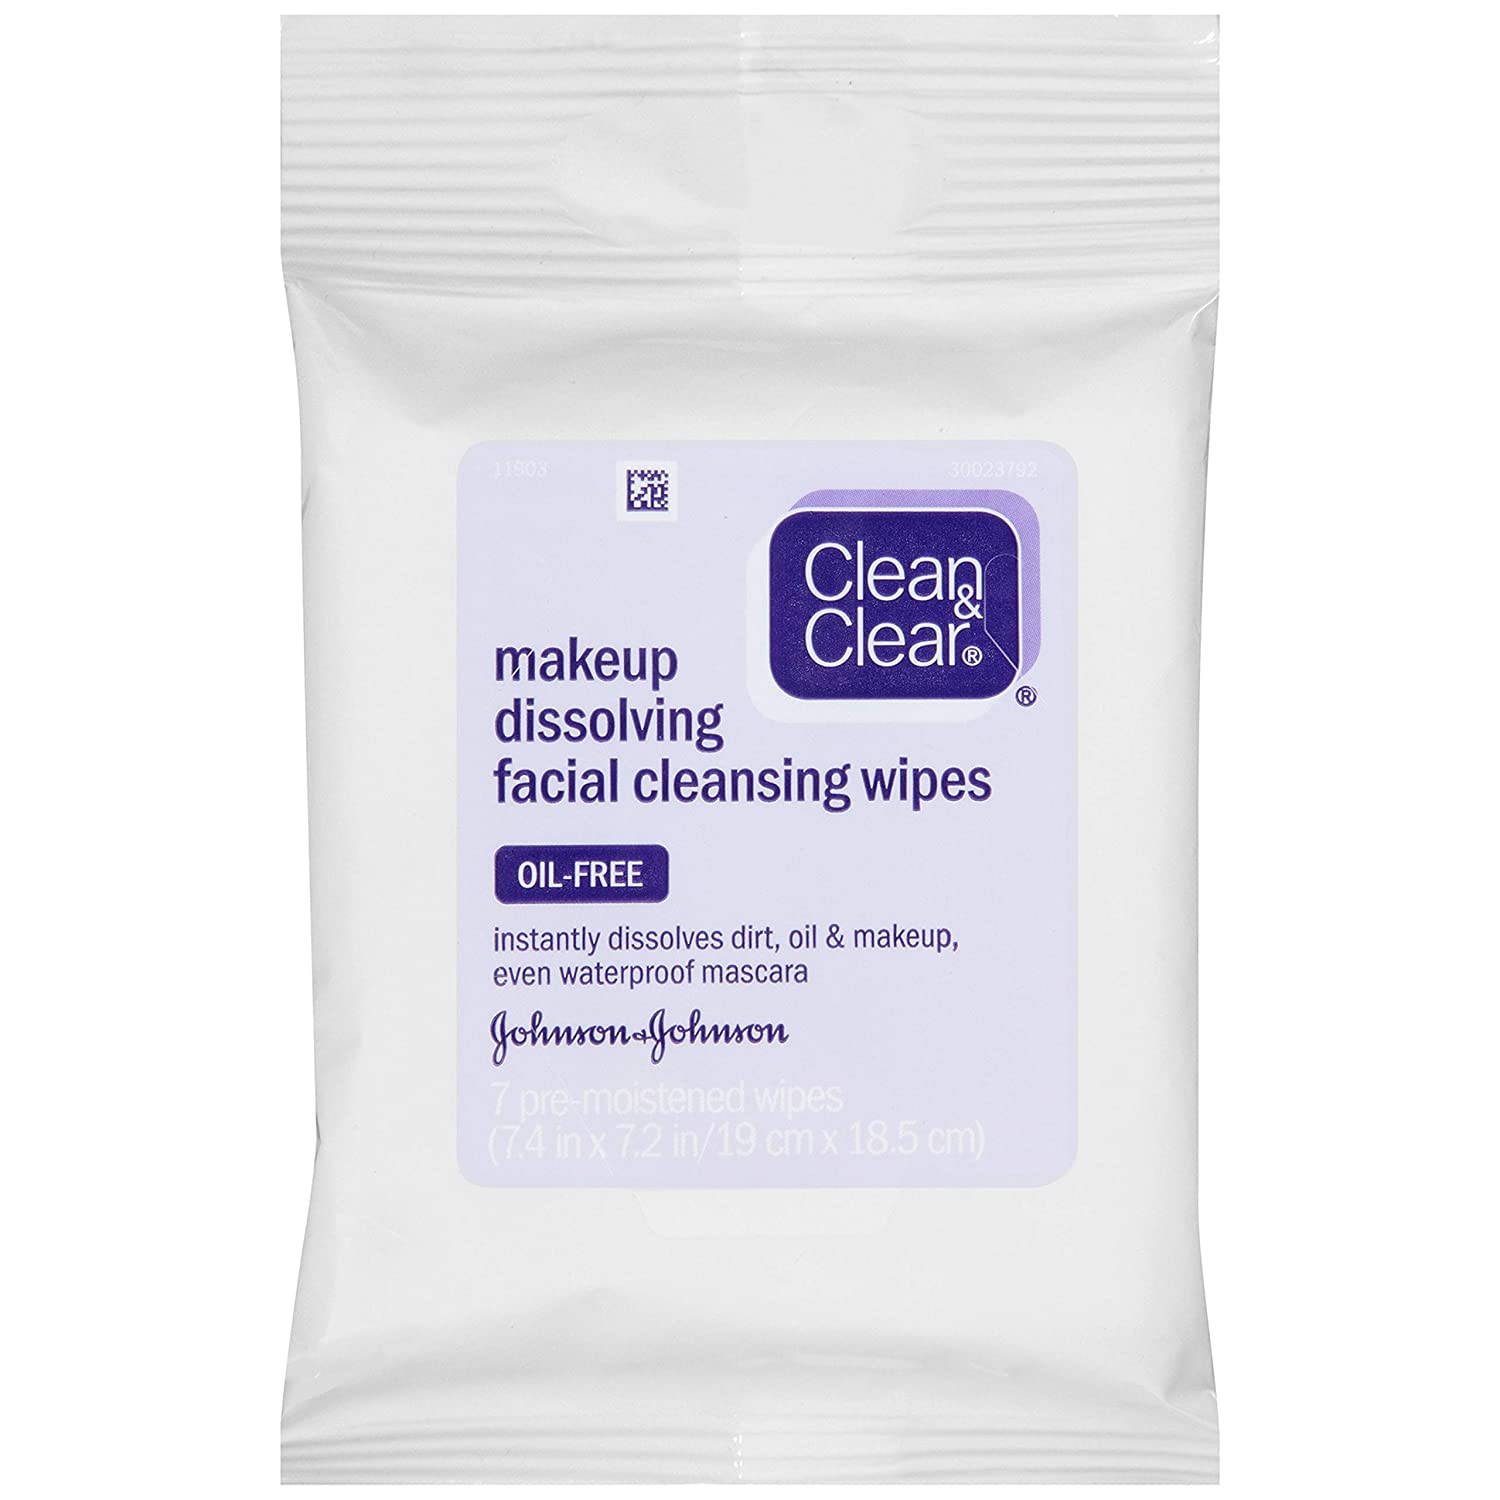 Clean & Clear Cleansers Makeup Dissolving Facial Cleansing Wipes Oil-Free - 25ct/12pk